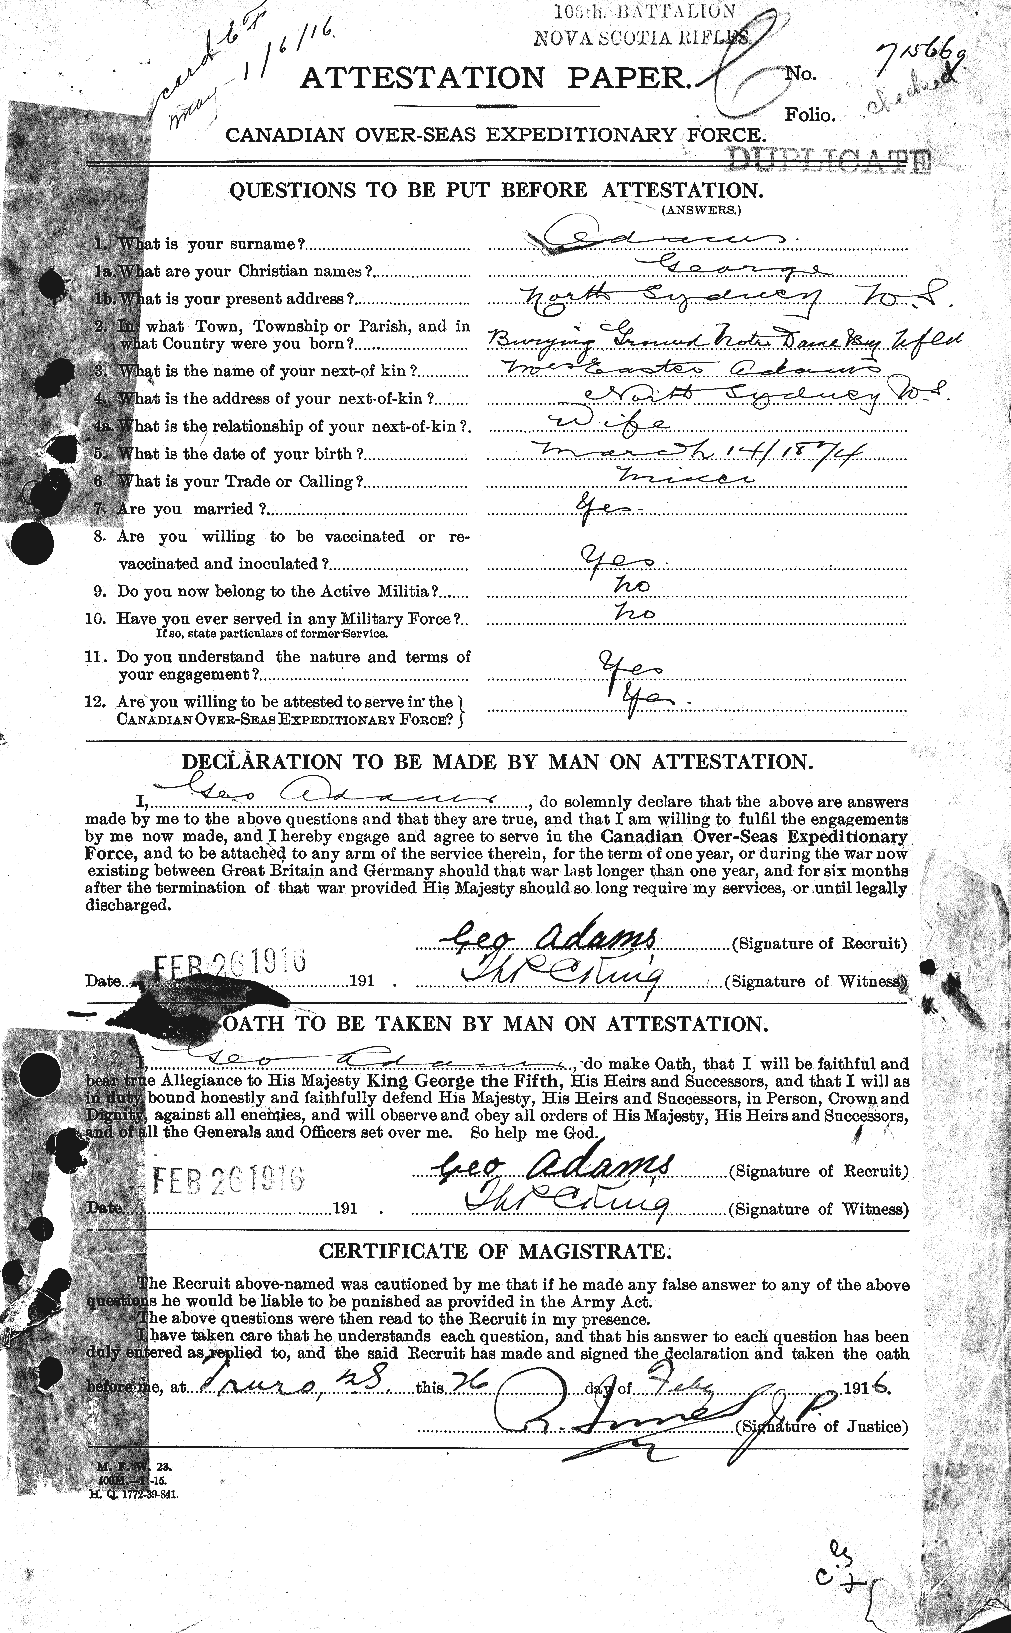 Personnel Records of the First World War - CEF 202533a